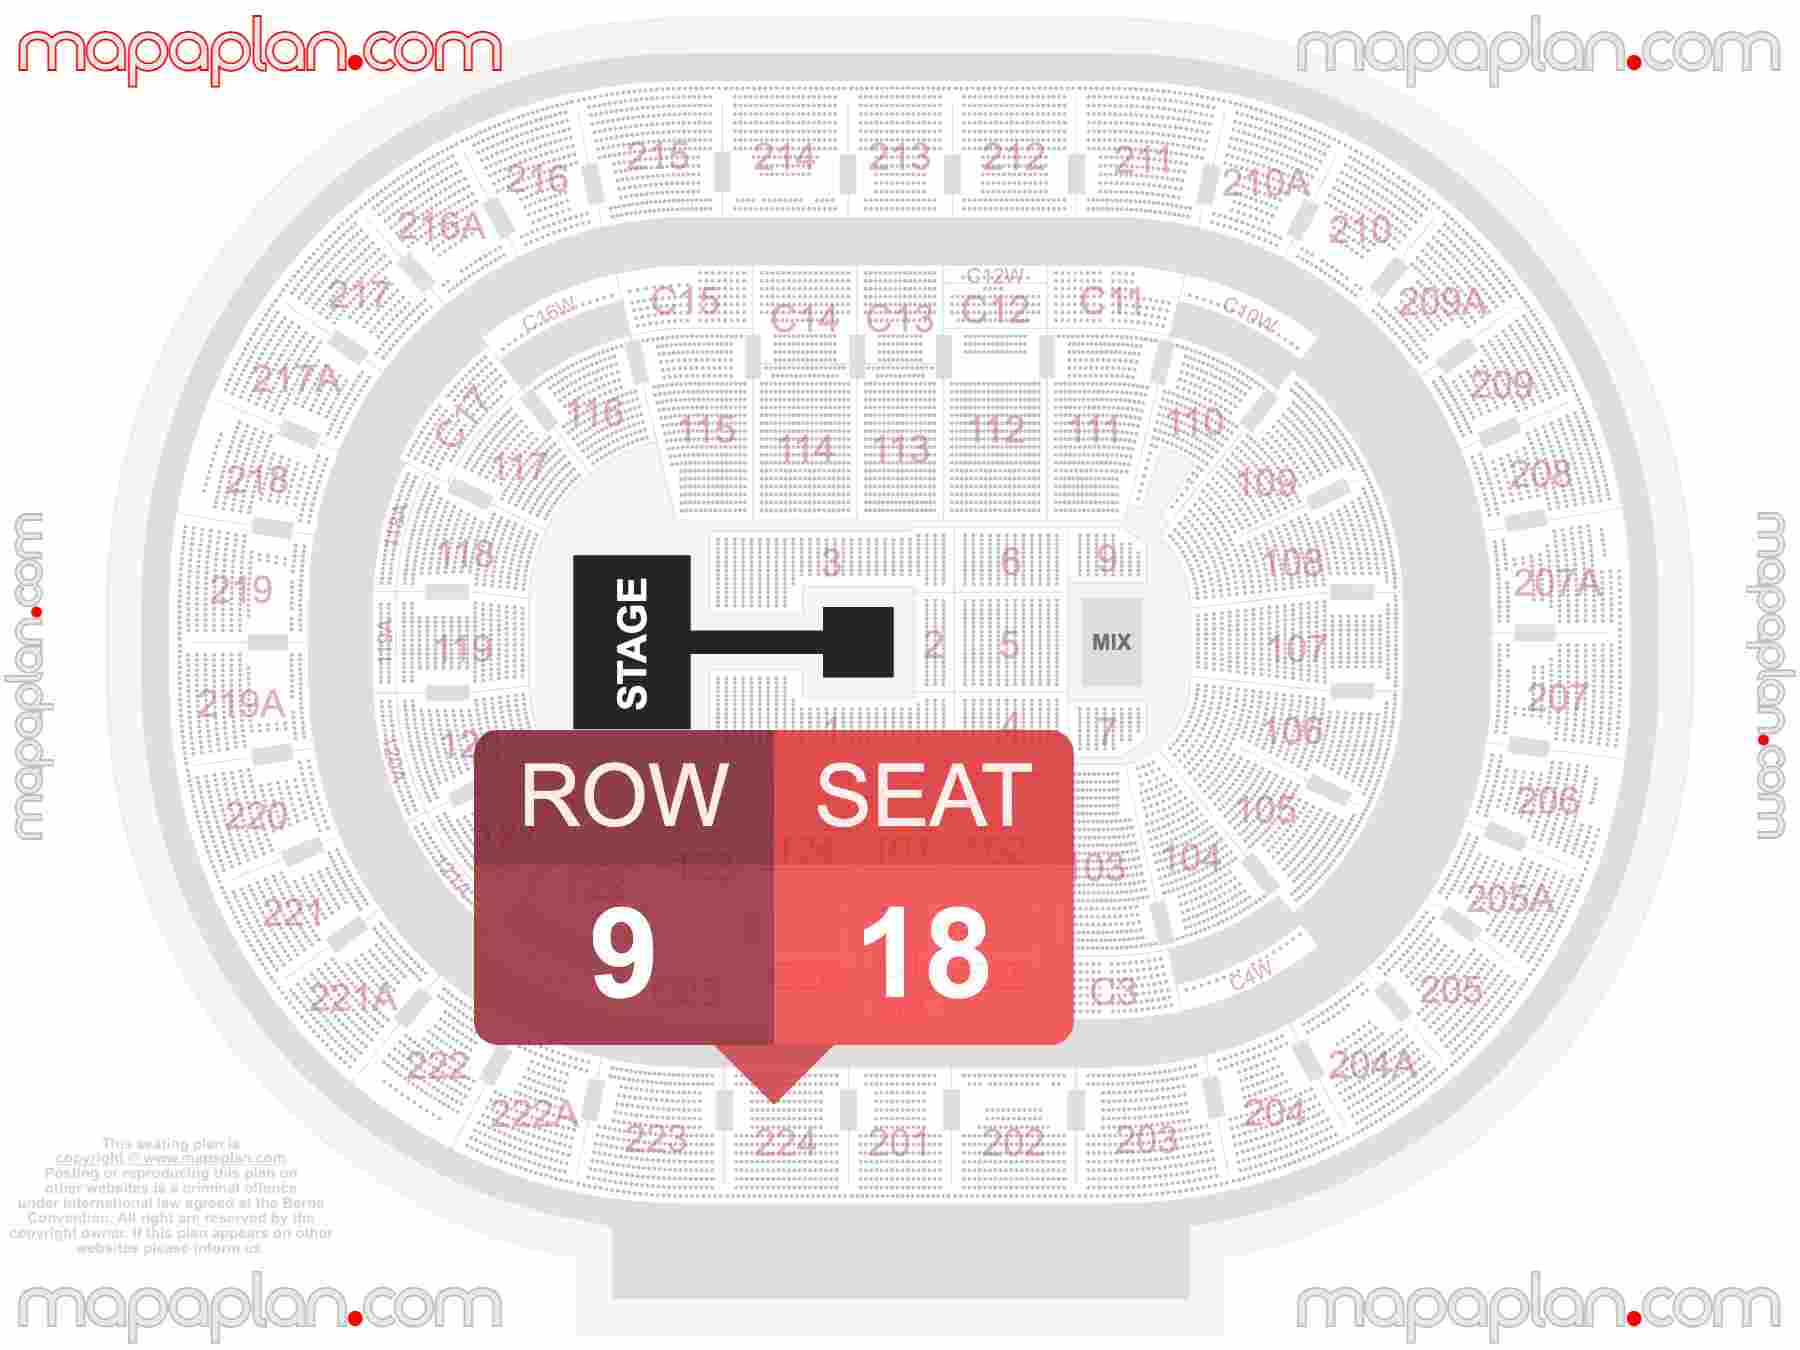 Philadelphia Wells Fargo Center seating chart Catwalk extended runway concert B-stage seating chart with exact section numbers showing best rows and seats selection 3d layout - Best interactive seat finder tool with precise detailed location data